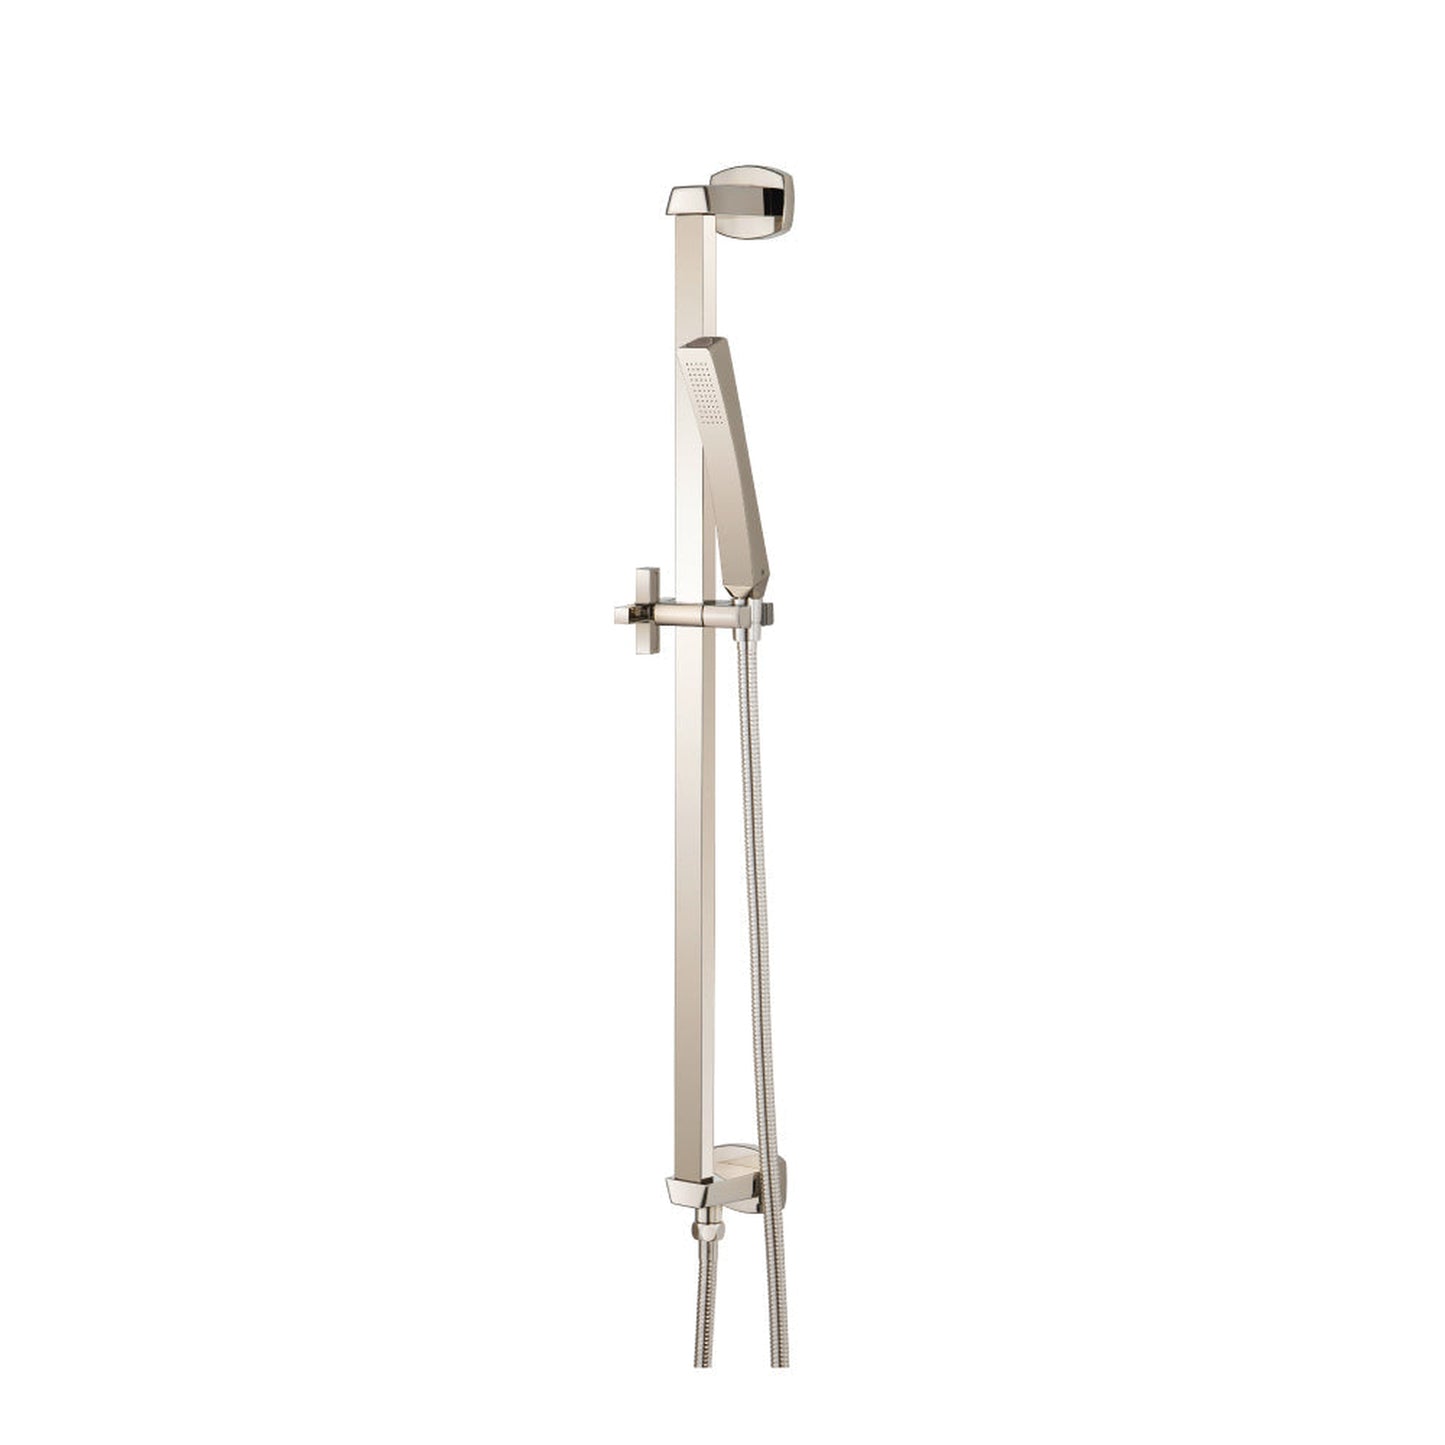 Isenberg Universal Fixtures Hand Shower Set With Slide Bar, Integrated Elbow and Hose in Polished Nickel (240.2016PN)